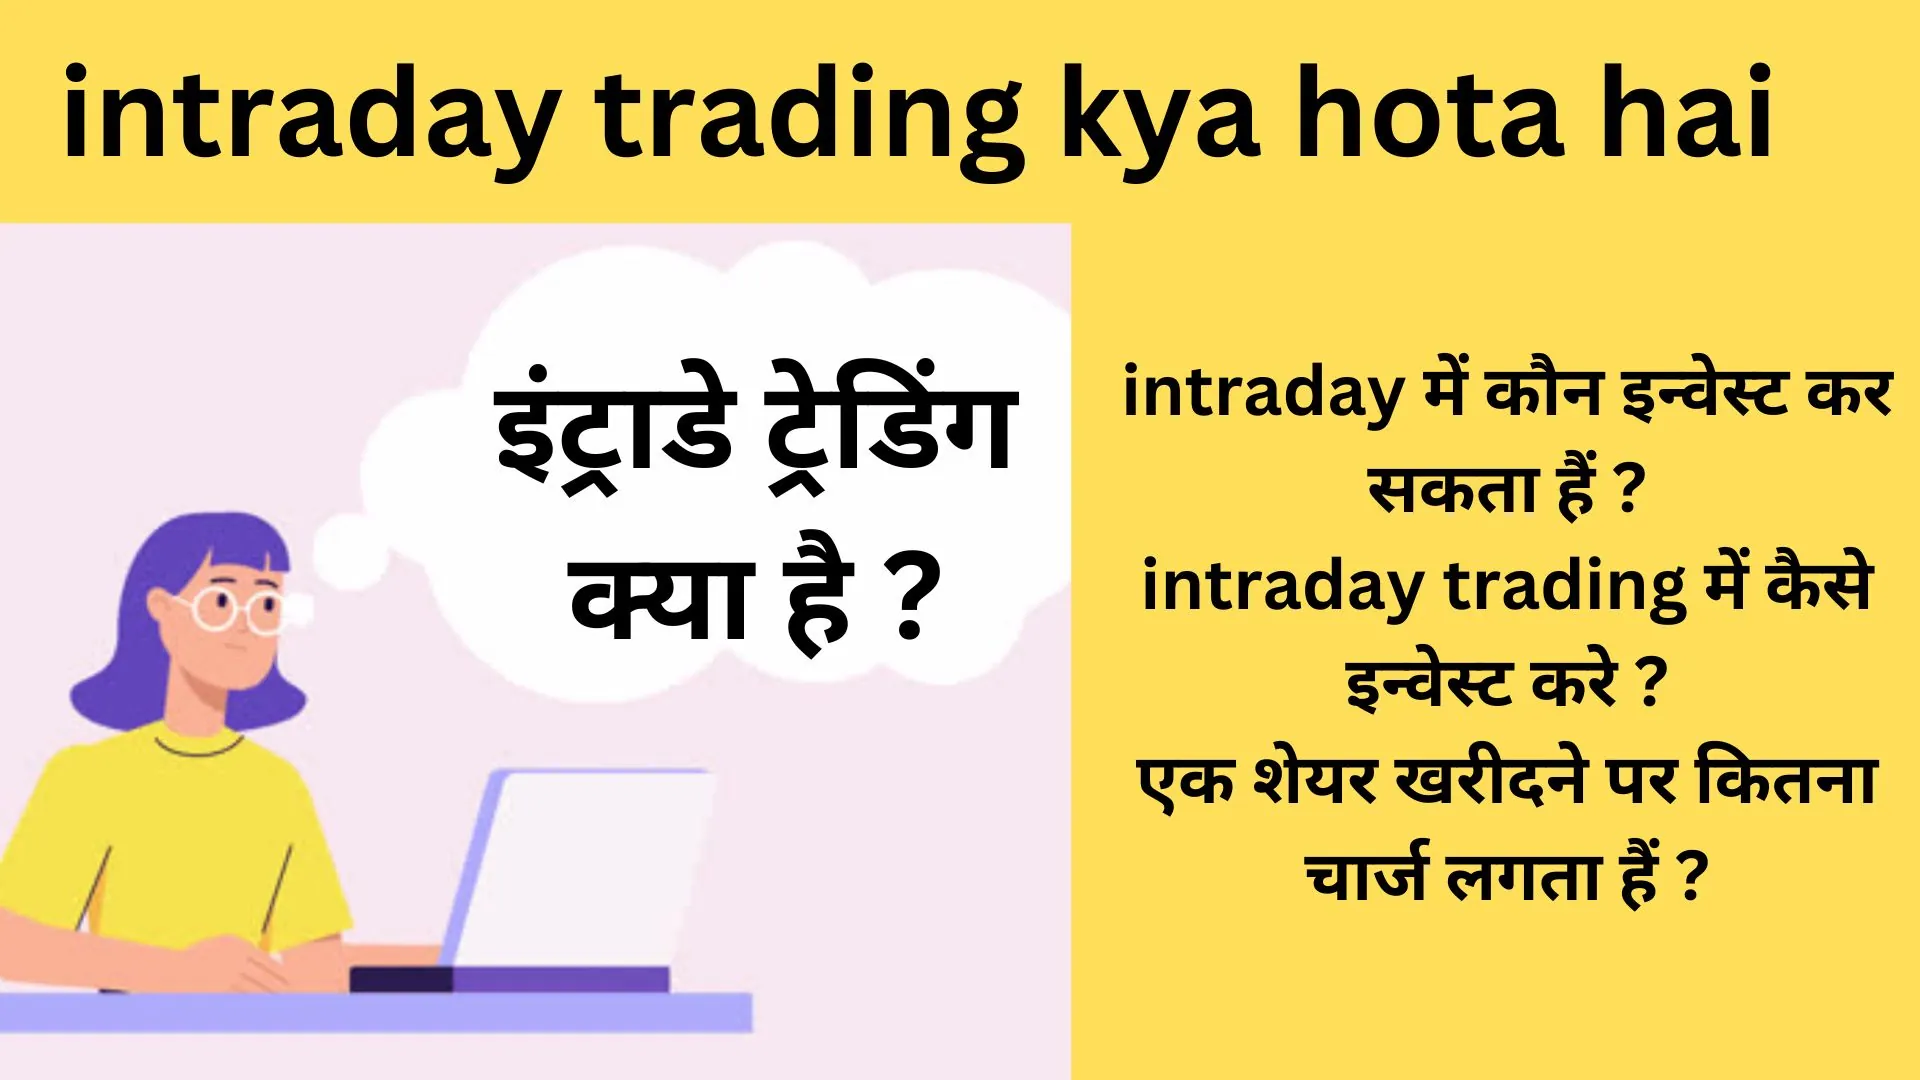 intraday-trading-kya-hota-hai-what-is-intraday-trading-in-hindi